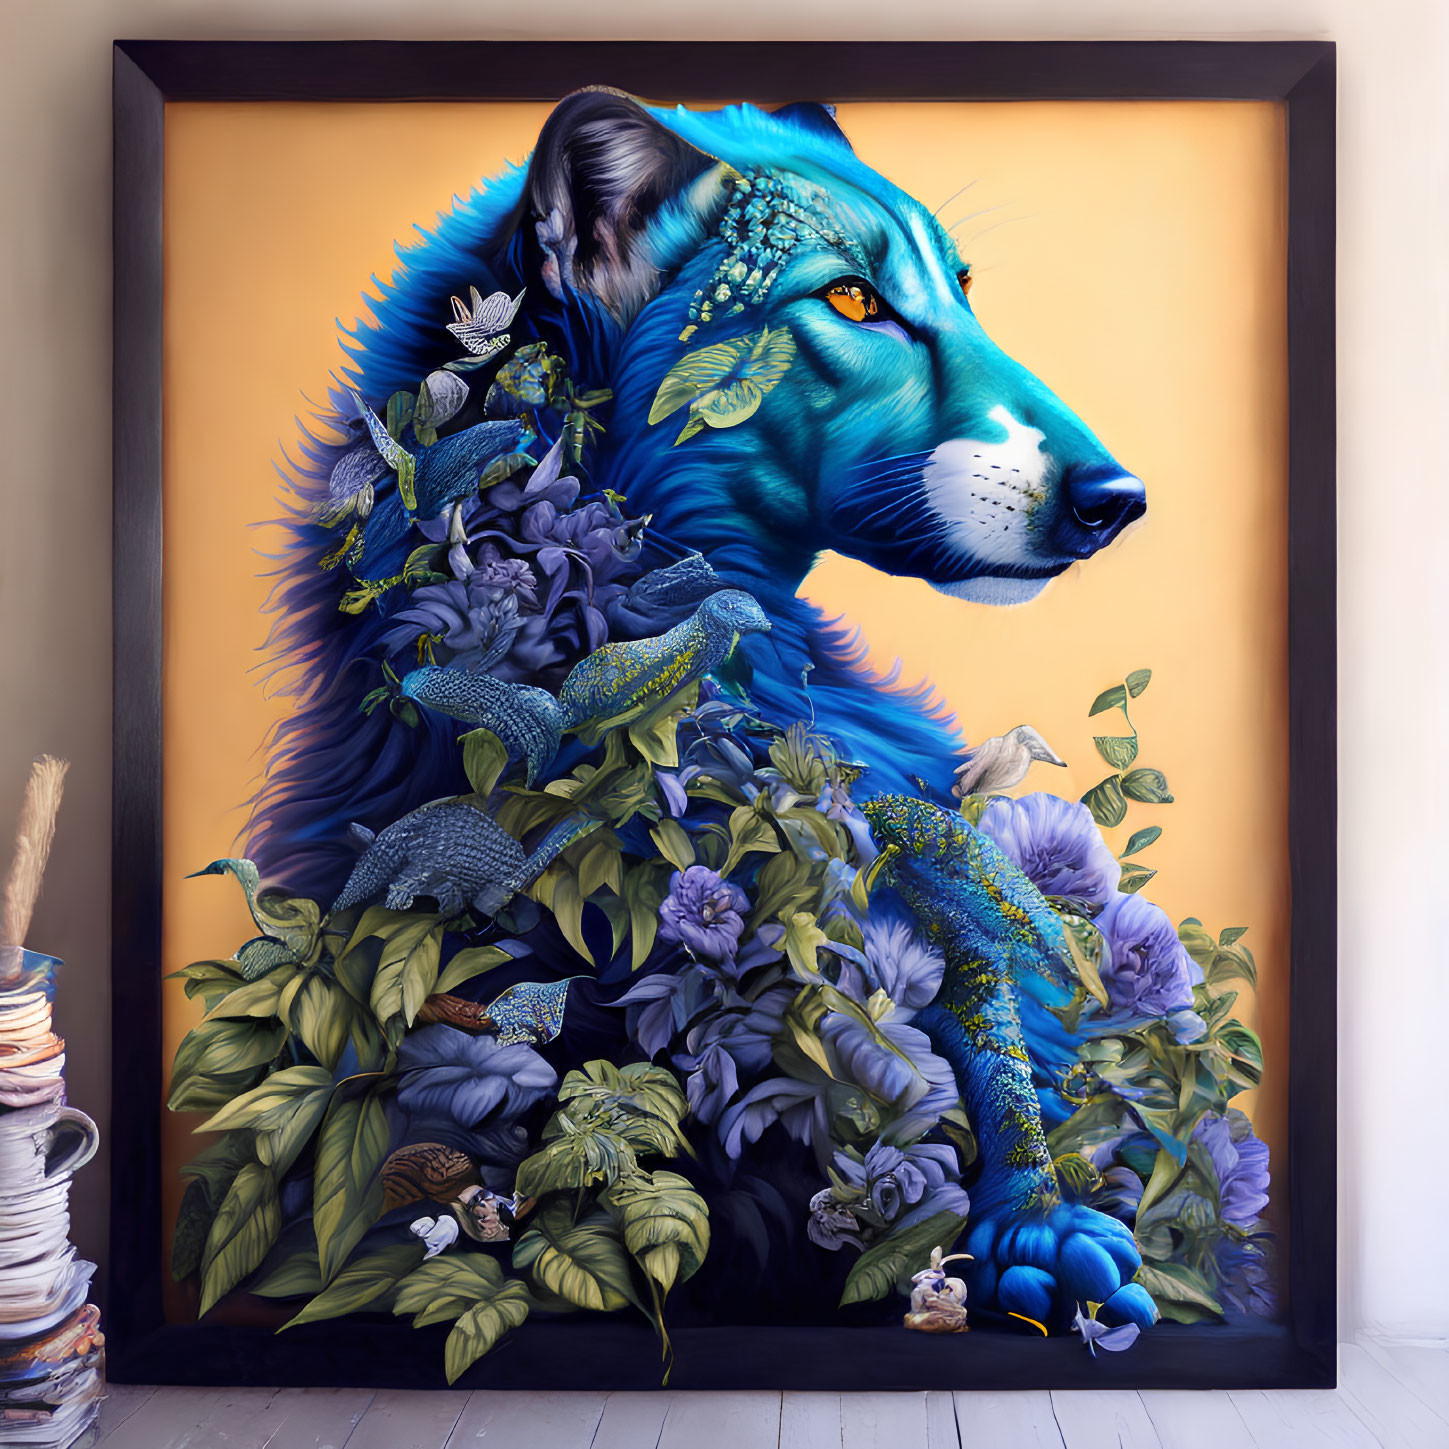 Detailed Blue Wolf Illustration Surrounded by Flora and Fauna on Wall